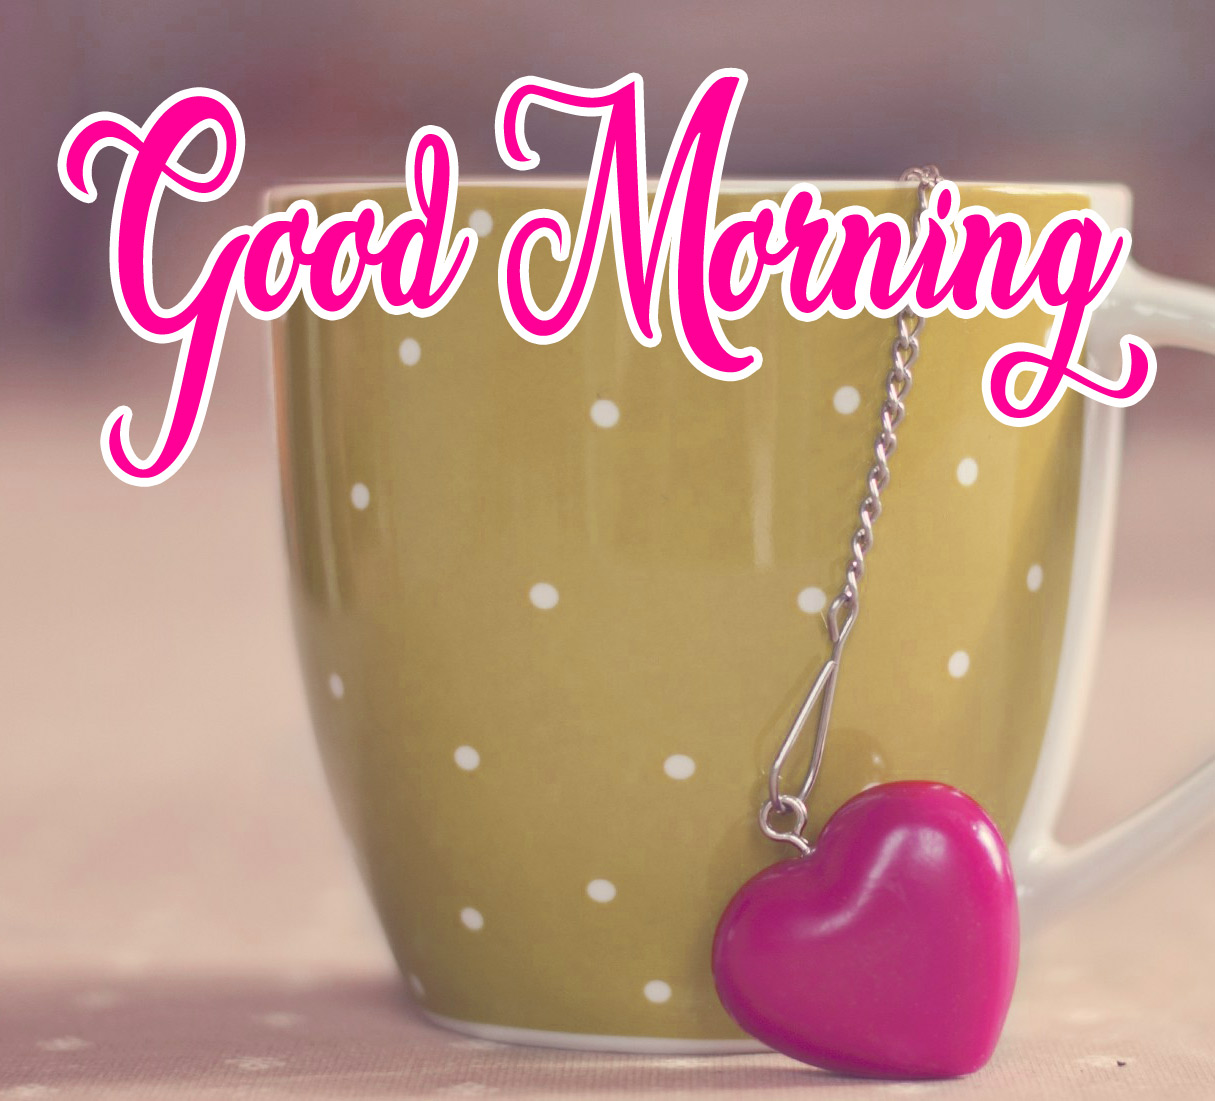 Free High Quality Good Morning Photo Download 